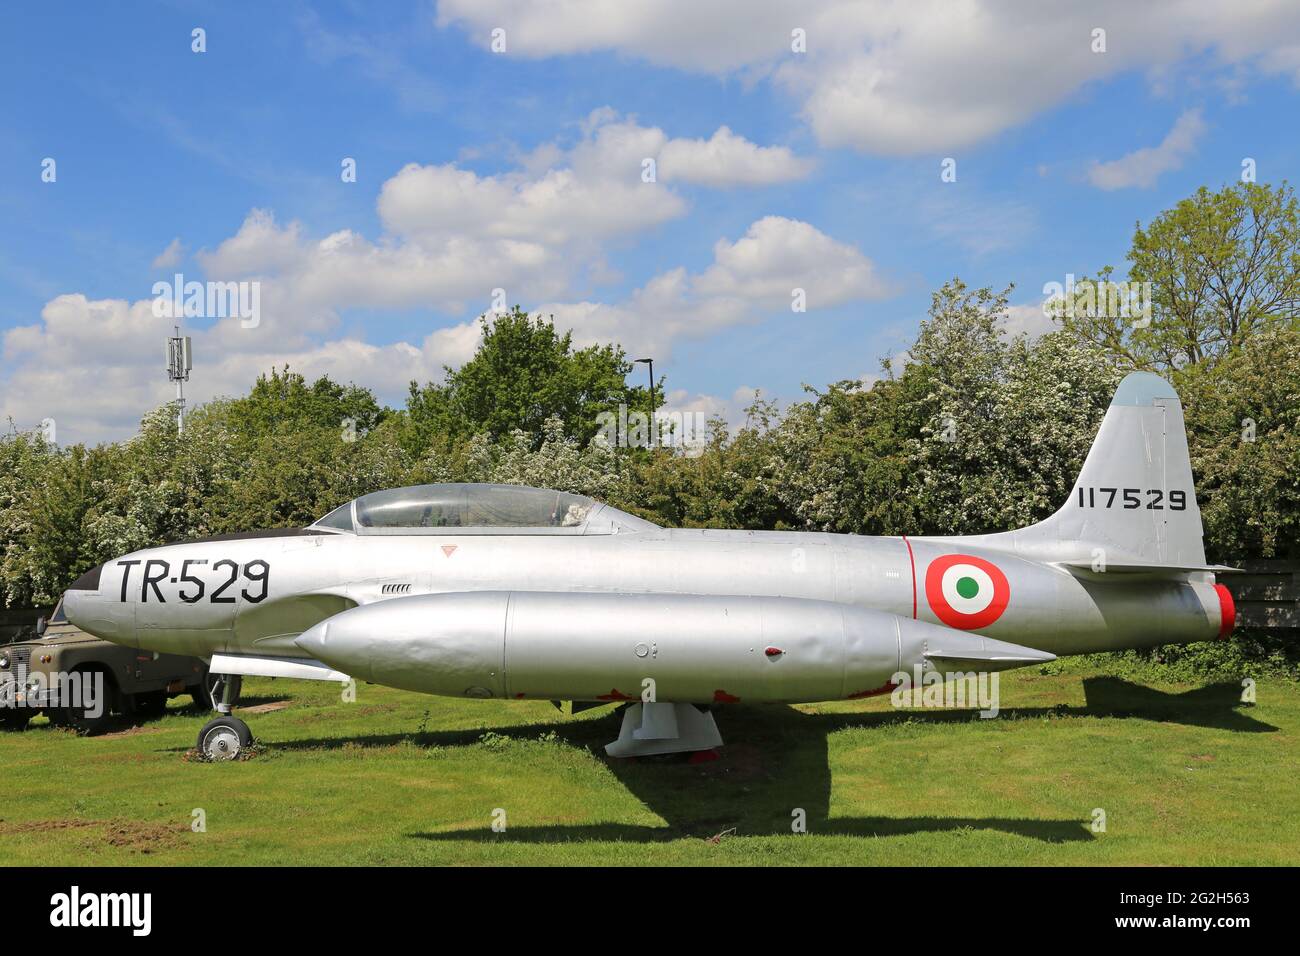 Lockheed T-33 Shooting Star (1950), Midland Air Museum, aéroport de Coventry, Baginton, Warwickshire, Angleterre, Grande-Bretagne, Royaume-Uni, Europe Banque D'Images